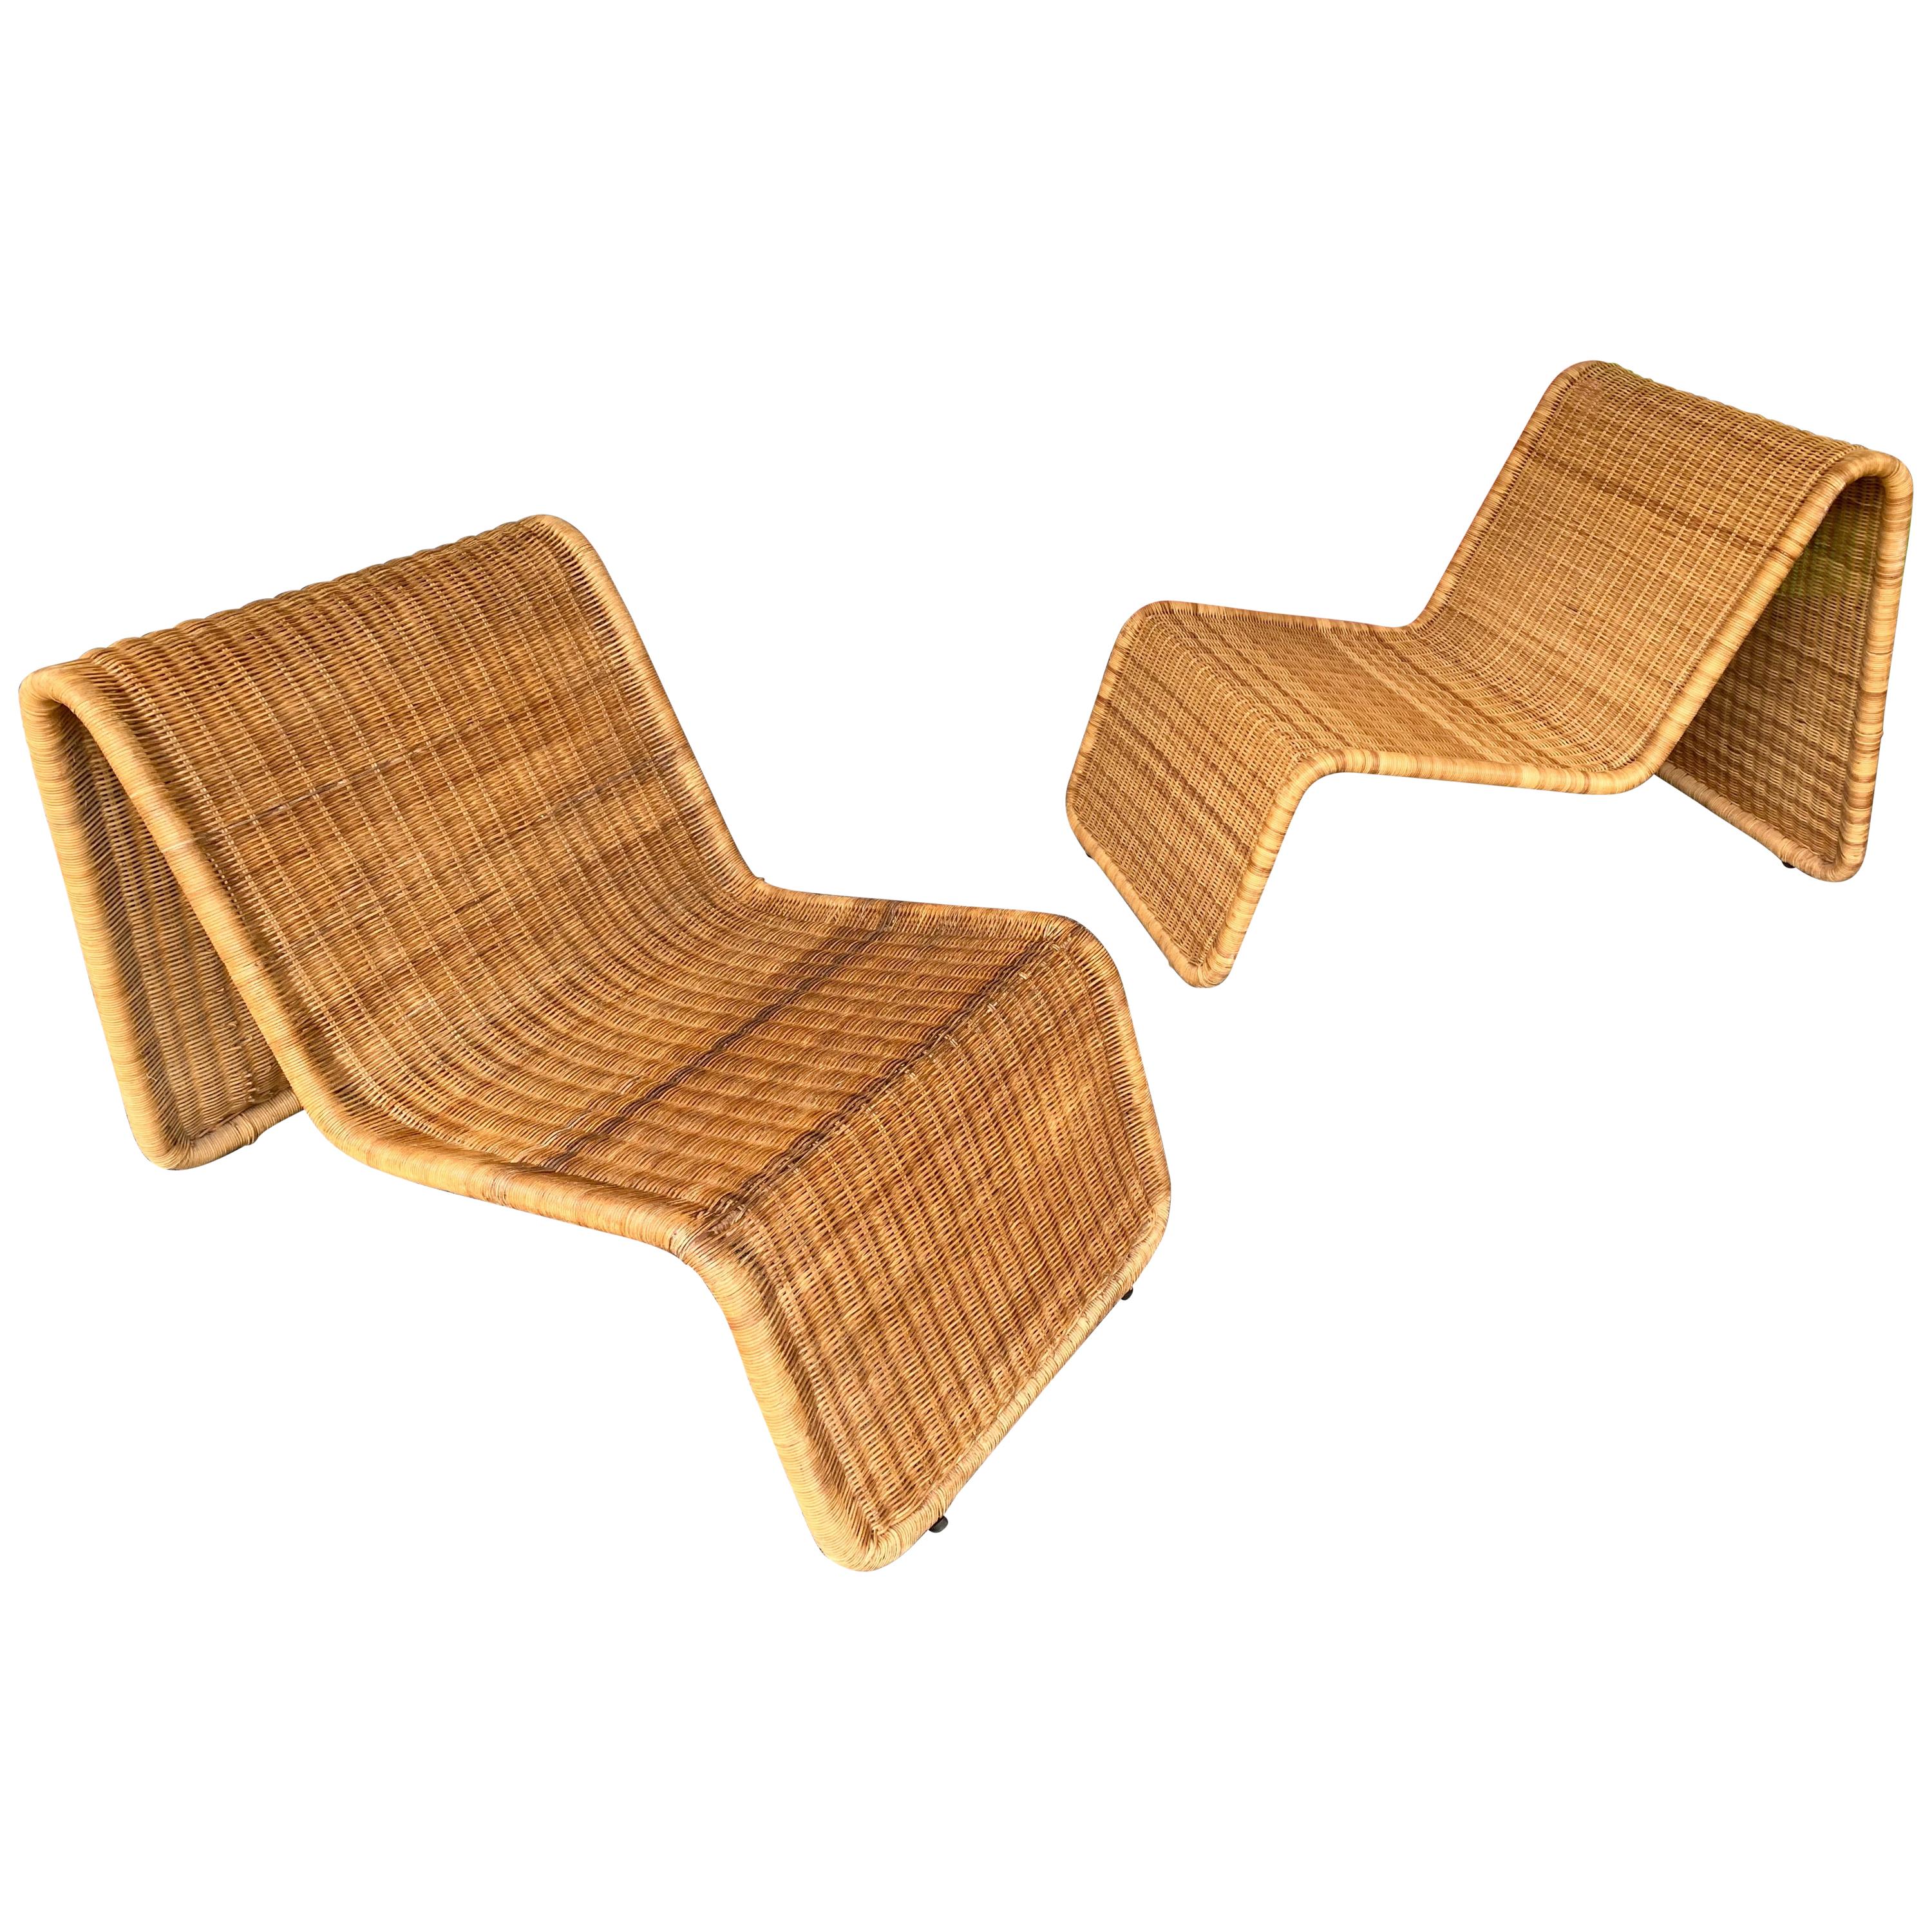 Pair of Rattan Lounge Chair P3 by Tito Agnoli, Italy, 1960s